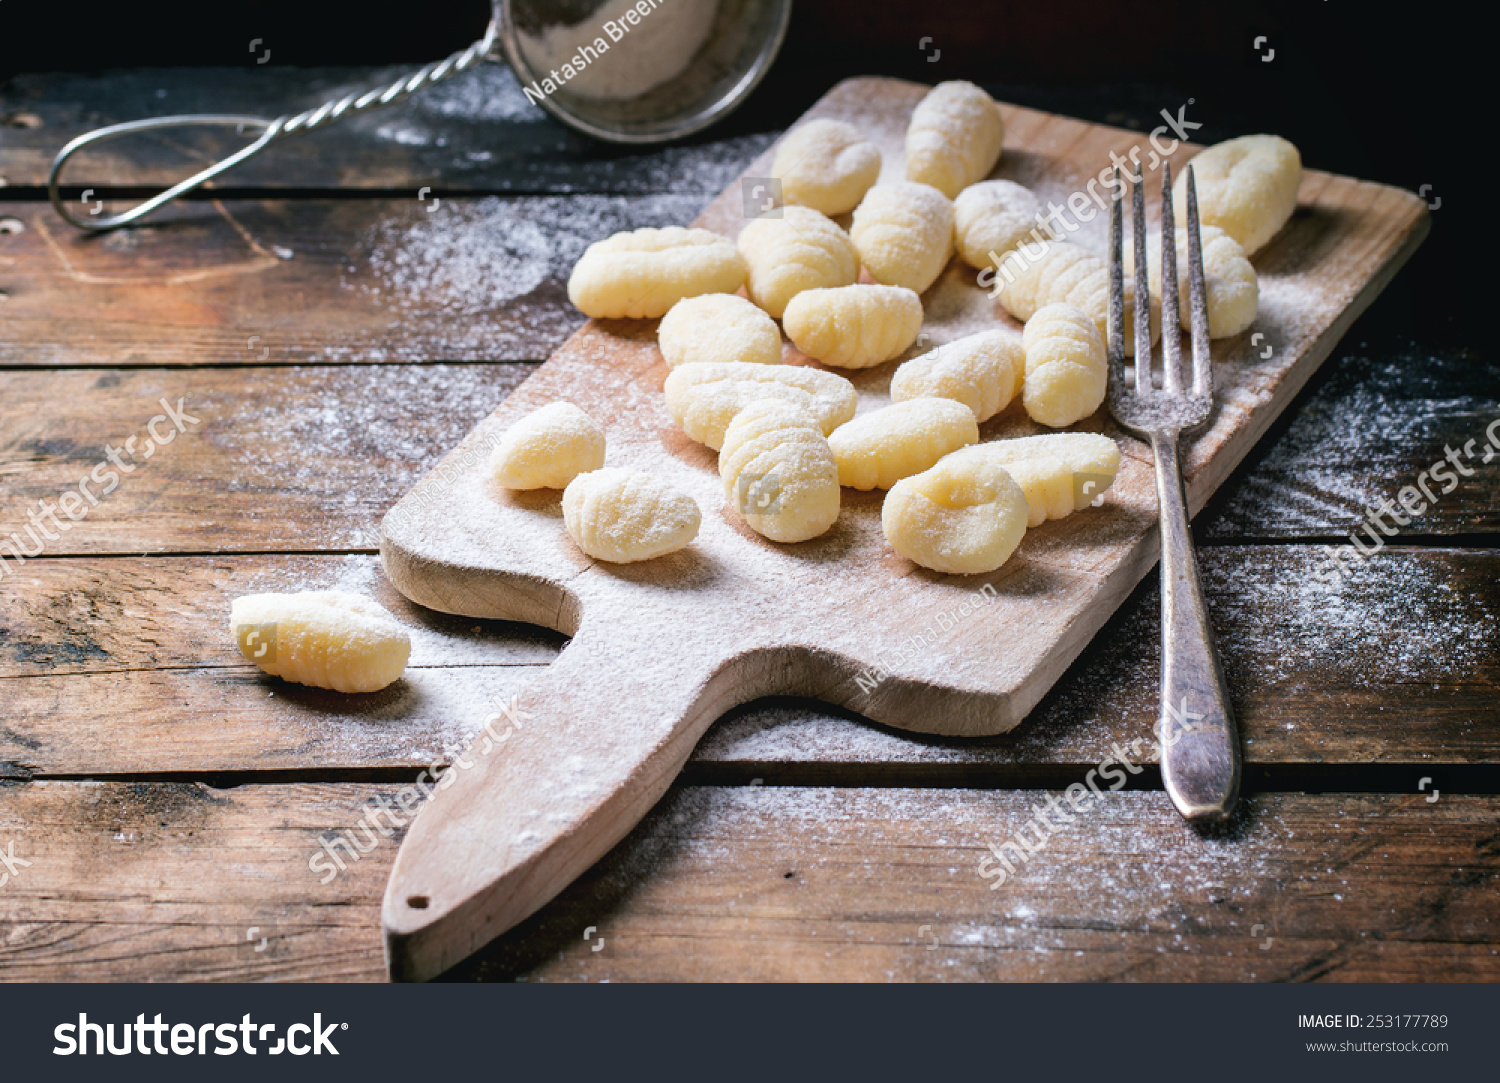 Uncooked homemade potato gnocchi with fork and strainer on vintage cutting board over wooden table with flour. See series. #253177789